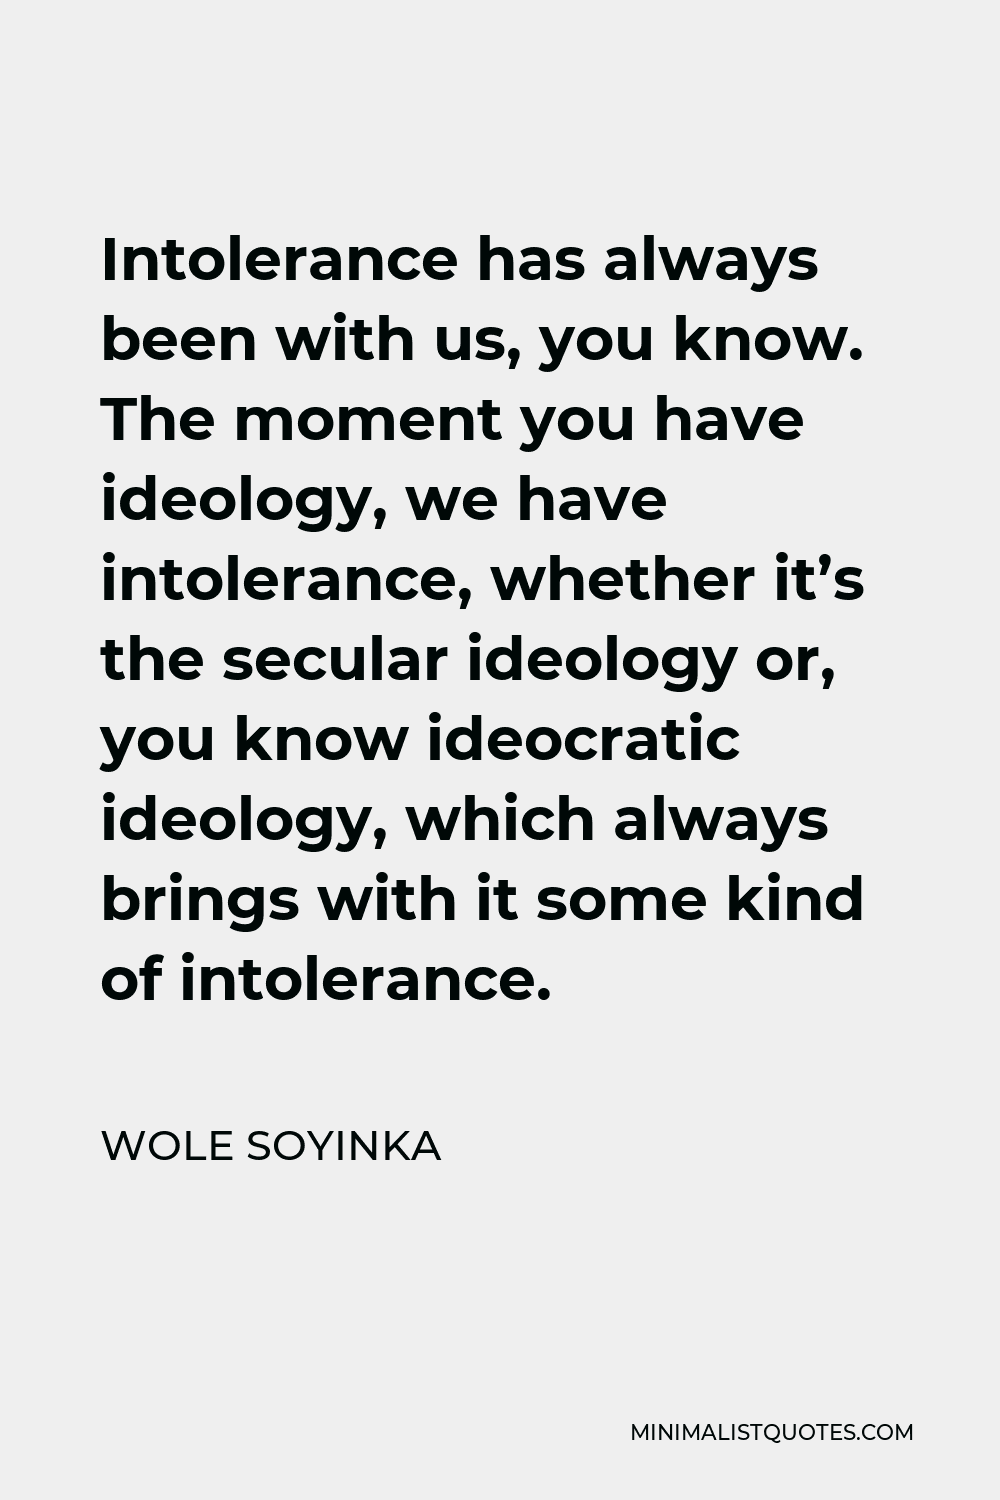 Wole Soyinka Quote - Intolerance has always been with us, you know. The moment you have ideology, we have intolerance, whether it’s the secular ideology or, you know ideocratic ideology, which always brings with it some kind of intolerance.